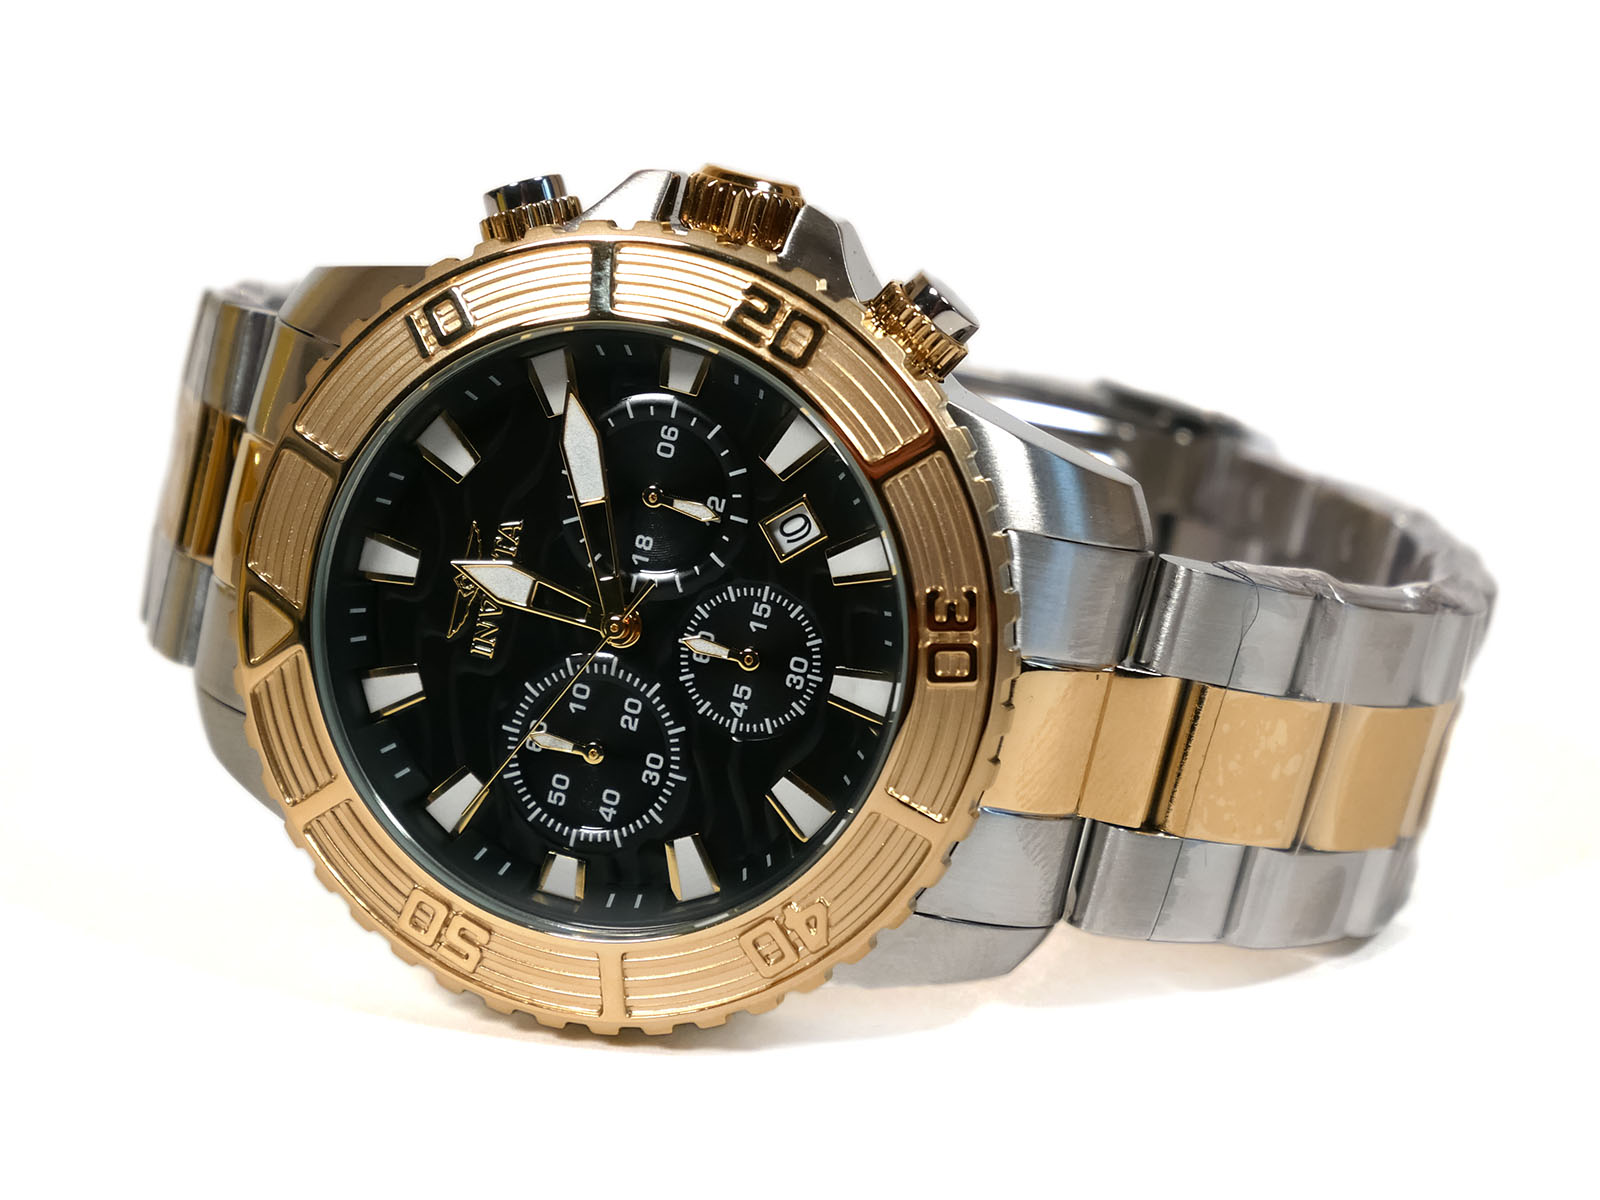 Invicta 24003 Pro Diver Watch ⋆ High Quality Watch Gallery